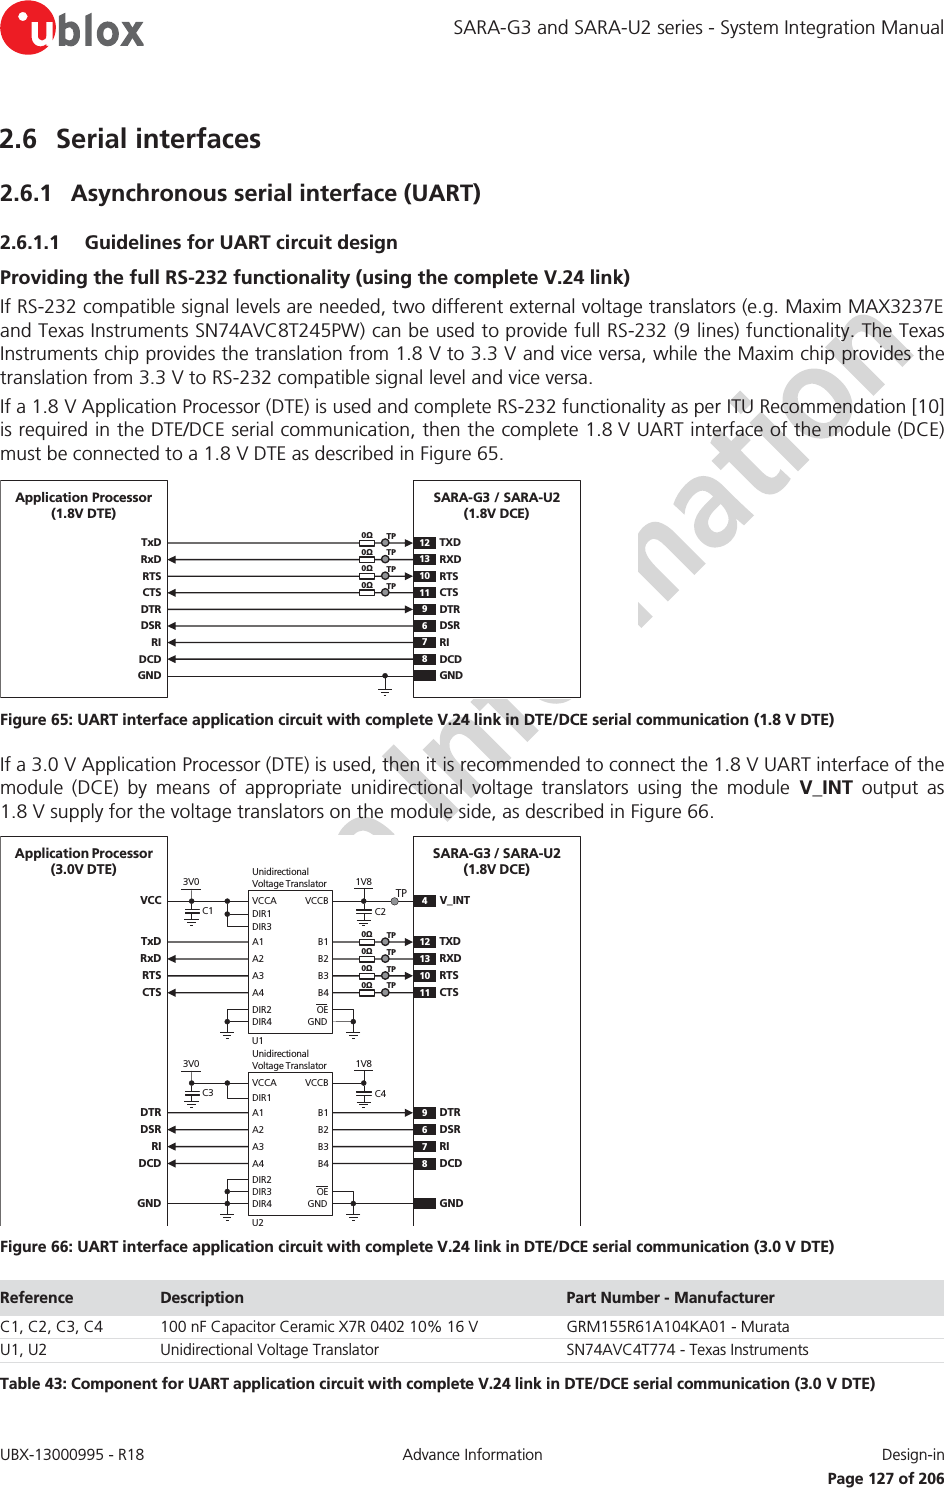 SARA-G3 and SARA-U2 series - System Integration Manual UBX-13000995 - R18  Advance Information  Design-in   Page 127 of 206 2.6 Serial interfaces 2.6.1 Asynchronous serial interface (UART) 2.6.1.1 Guidelines for UART circuit design Providing the full RS-232 functionality (using the complete V.24 link) If RS-232 compatible signal levels are needed, two different external voltage translators (e.g. Maxim MAX3237E and Texas Instruments SN74AVC8T245PW) can be used to provide full RS-232 (9 lines) functionality. The Texas Instruments chip provides the translation from 1.8 V to 3.3 V and vice versa, while the Maxim chip provides the translation from 3.3 V to RS-232 compatible signal level and vice versa. If a 1.8 V Application Processor (DTE) is used and complete RS-232 functionality as per ITU Recommendation [10] is required in the DTE/DCE serial communication, then the complete 1.8 V UART interface of the module (DCE) must be connected to a 1.8 V DTE as described in Figure 65. TxDApplication Processor(1.8V DTE)RxDRTSCTSDTRDSRRIDCDGNDSARA-G3 / SARA-U2(1.8V DCE)12TXD9DTR13RXD10RTS11CTS6DSR7RI8DCDGND0ΩTP0ΩTP0ΩTP0ΩTP Figure 65: UART interface application circuit with complete V.24 link in DTE/DCE serial communication (1.8 V DTE) If a 3.0 V Application Processor (DTE) is used, then it is recommended to connect the 1.8 V UART interface of the module (DCE) by means of appropriate unidirectional voltage translators using the module V_INT output as 1.8 V supply for the voltage translators on the module side, as described in Figure 66. 4V_INTTxDApplication Processor(3.0V DTE)RxDRTSCTSDTRDSRRIDCDGNDSARA-G3 / SARA-U2(1.8V DCE)12 TXD9DTR13 RXD10 RTS11 CTS6DSR7RI8DCDGND1V8B1 A1GNDU1B3A3VCCBVCCAUnidirectionalVoltage TranslatorC1 C23V0DIR3DIR2 OEDIR1VCCB2 A2B4A4DIR41V8B1 A1GNDU2B3A3VCCBVCCAUnidirectionalVoltage TranslatorC3 C43V0DIR1DIR3 OEB2 A2B4A4DIR4DIR2TP0ΩTP0ΩTP0ΩTP0ΩTP Figure 66: UART interface application circuit with complete V.24 link in DTE/DCE serial communication (3.0 V DTE) Reference  Description  Part Number - Manufacturer C1, C2, C3, C4 100 nF Capacitor Ceramic X7R 0402 10% 16 V GRM155R61A104KA01 - Murata U1, U2 Unidirectional Voltage Translator SN74AVC4T774 - Texas Instruments Table 43: Component for UART application circuit with complete V.24 link in DTE/DCE serial communication (3.0 V DTE) 